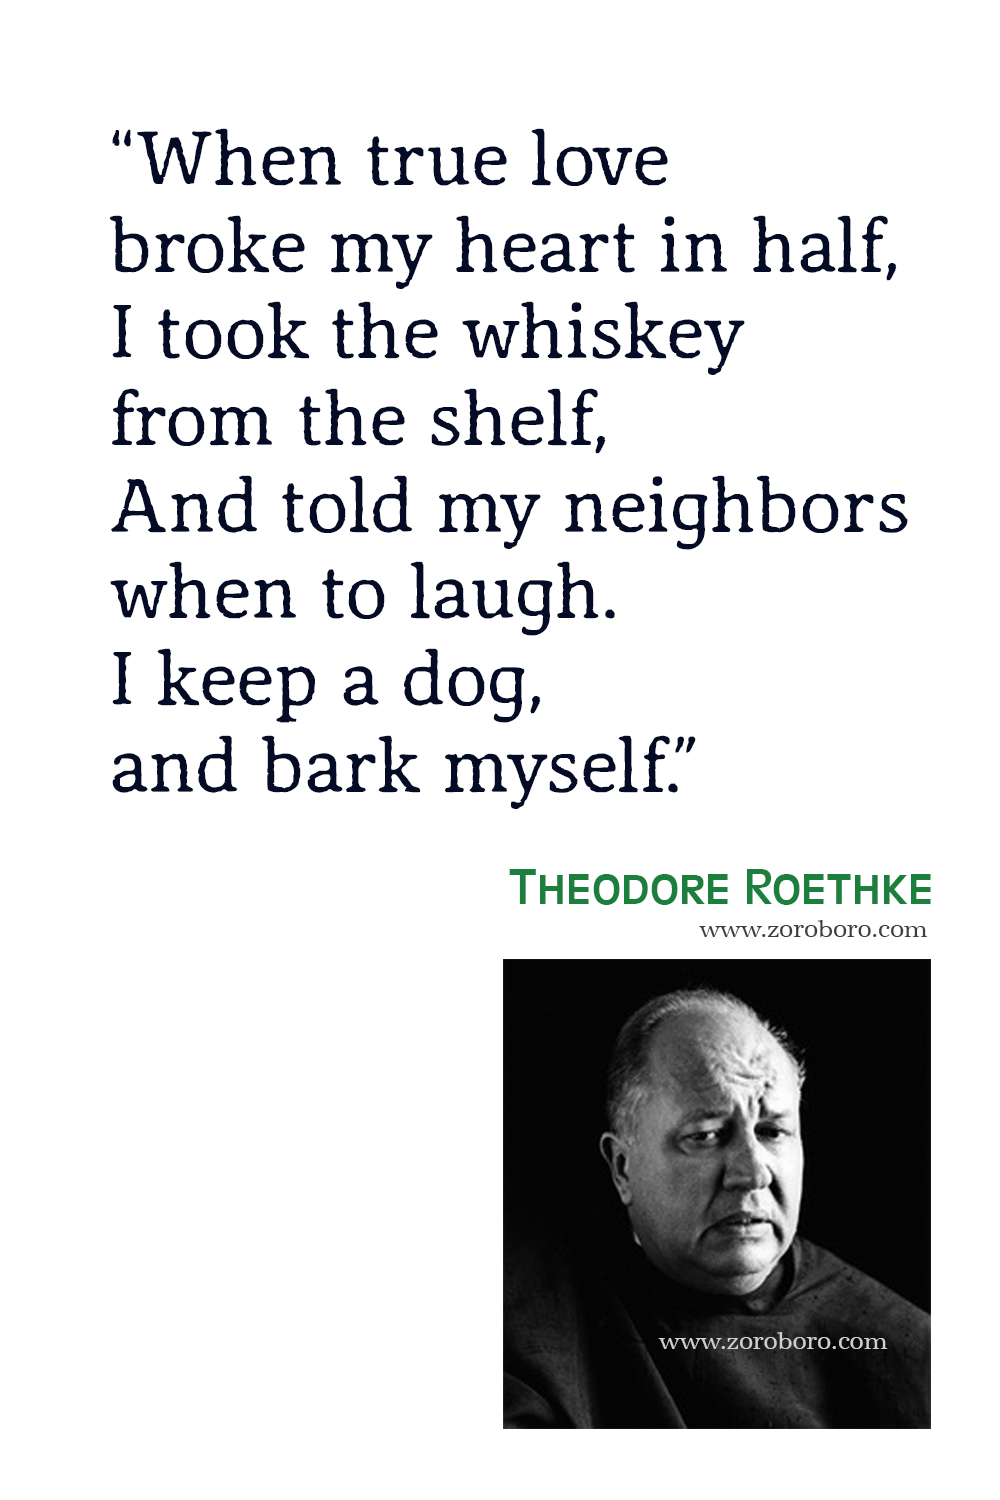 Theodore Roethke Quotes, Theodore Roethke Poems, Poetry, Theodore Roethke Books Quotes, Theodore Roethke, The Collected Poems, Dream, Love, Life.